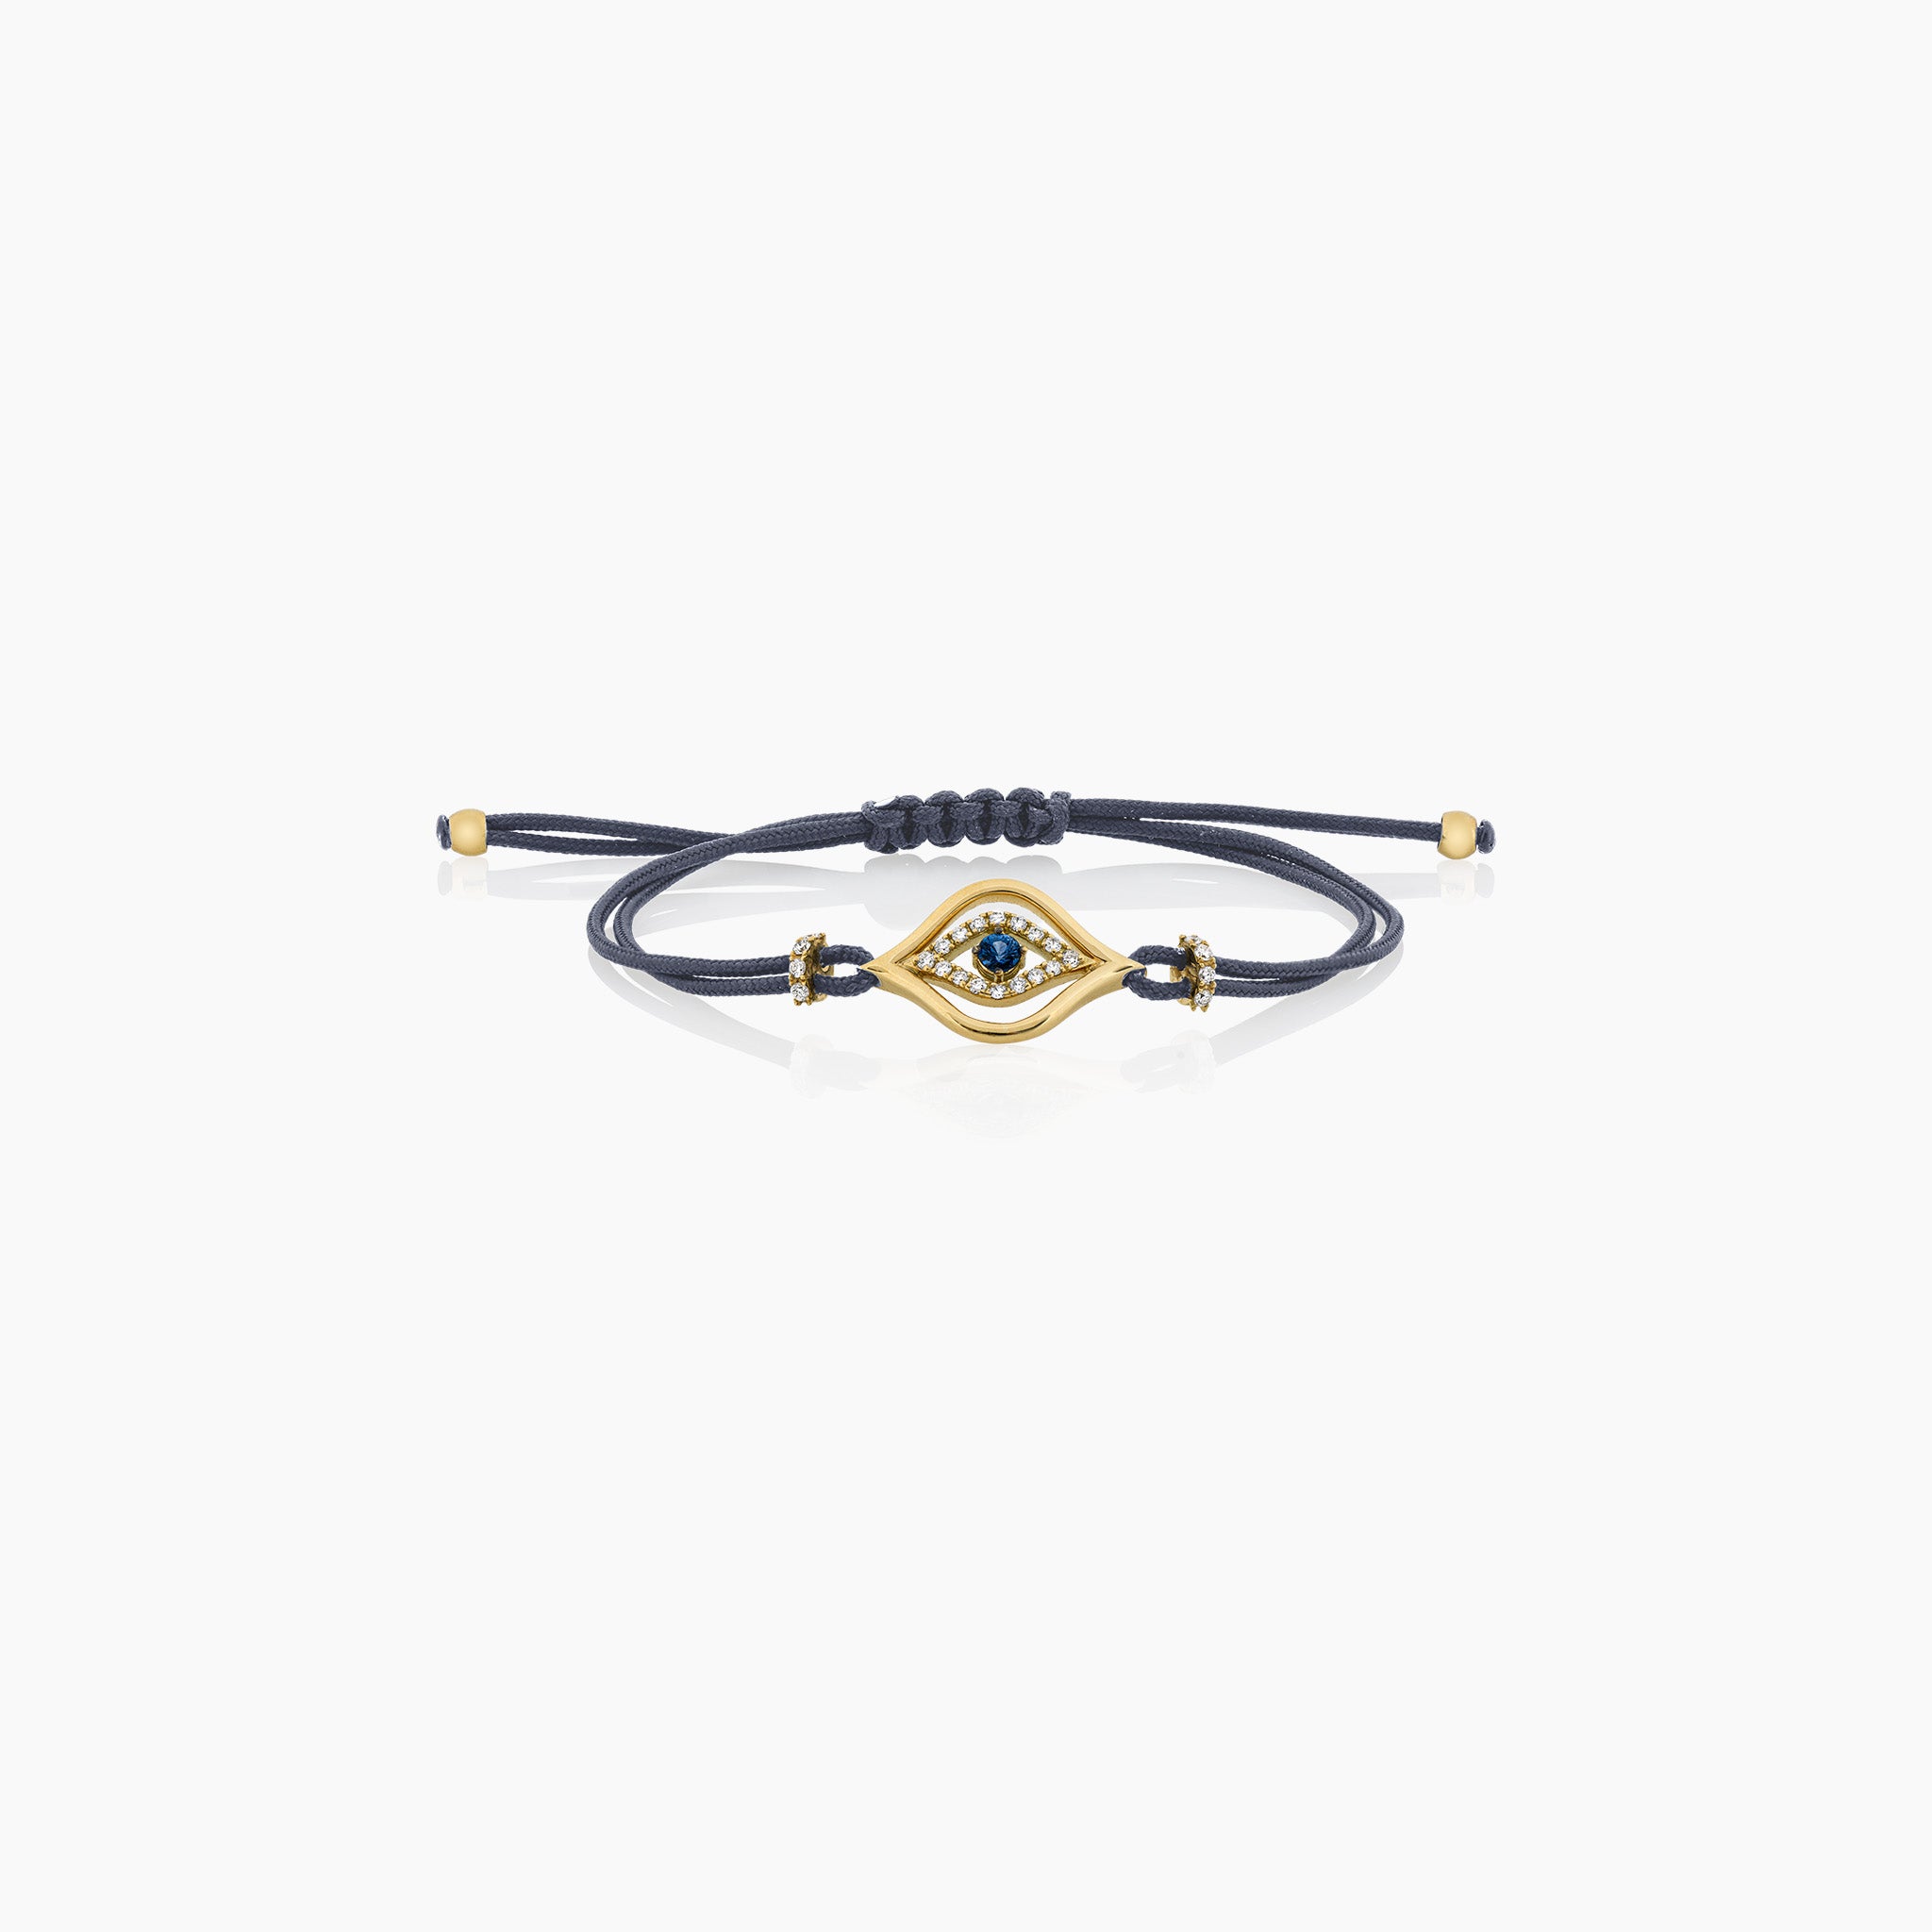 A stylish evil eye cord bracelet featuring a central sapphire surrounded by diamonds, set on a cord, presented against an off-white background. 